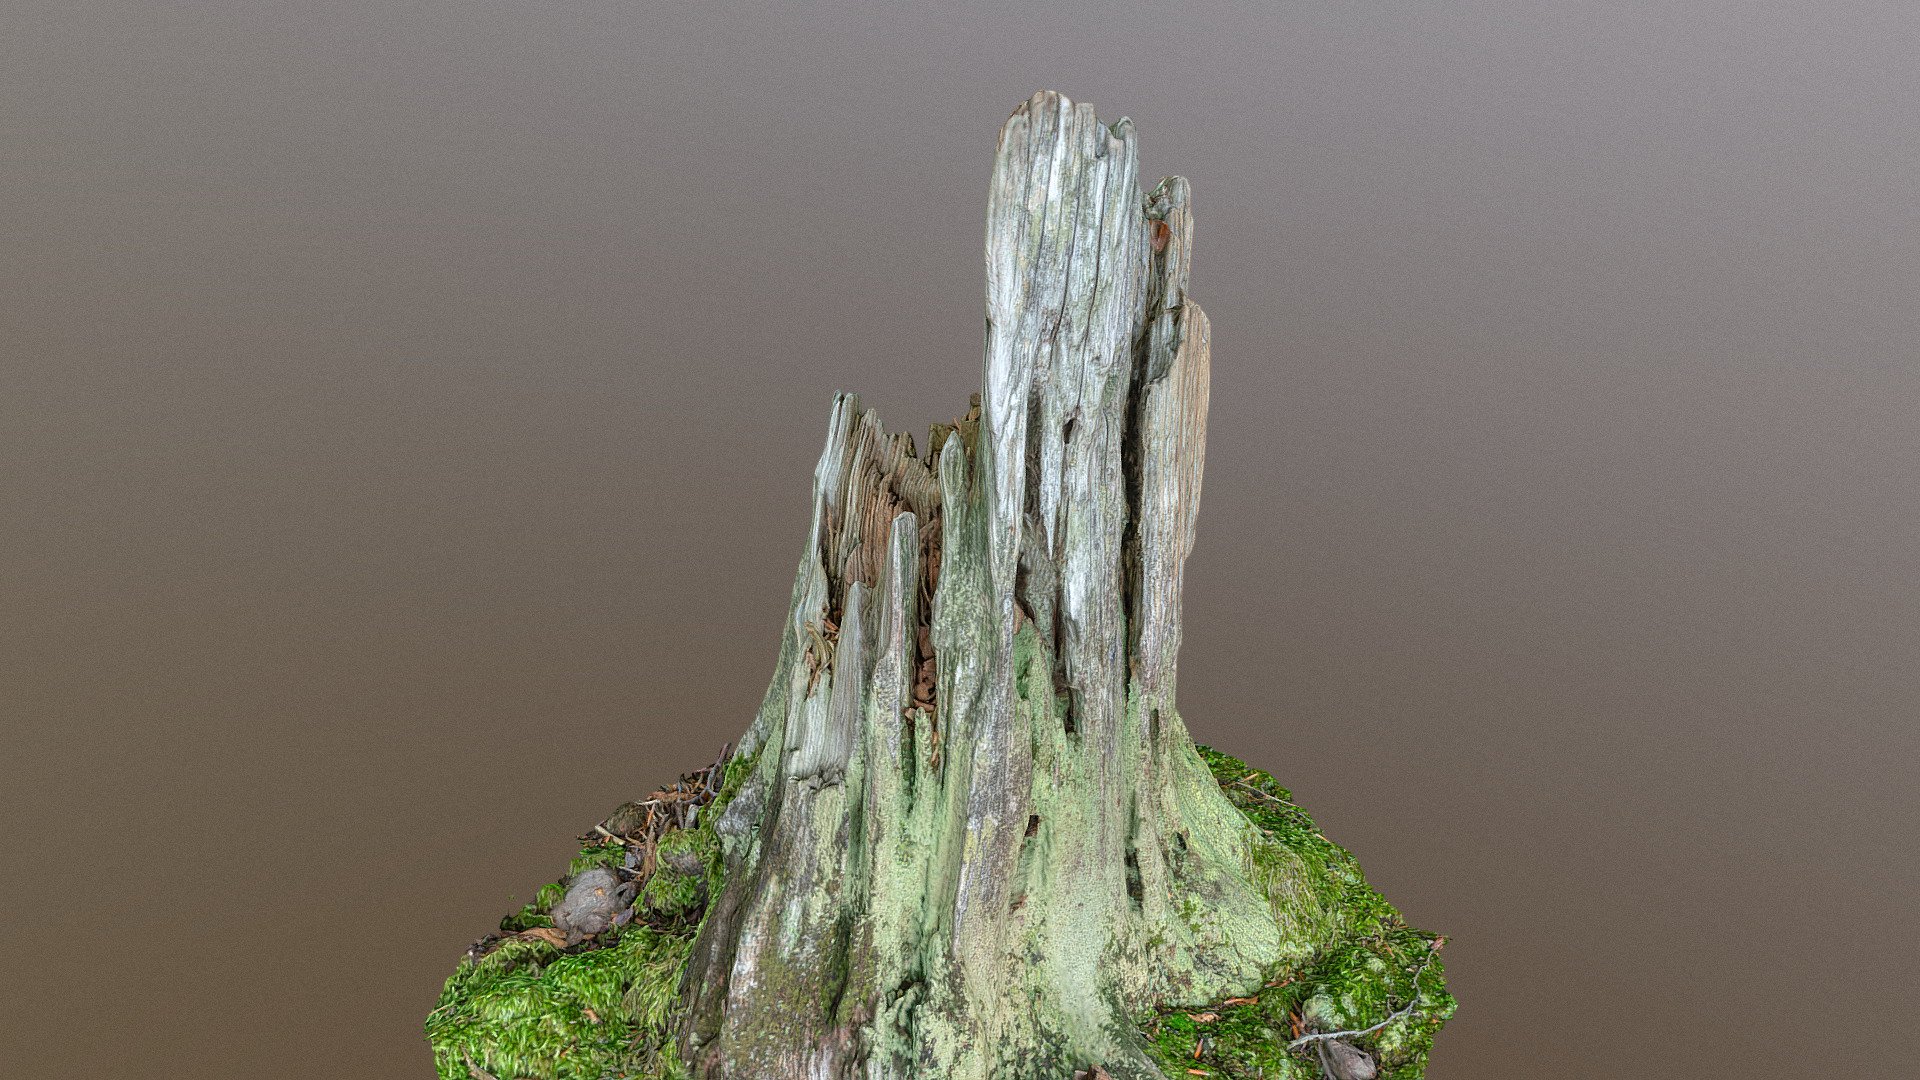 Rotting spruce stump covered by moss in forest, old wood tree lumber timber material isolated

photogrammetry scan (80x24MP), 3x8K textures - Rotting spruce stump - Buy Royalty Free 3D model by matousekfoto 3d model